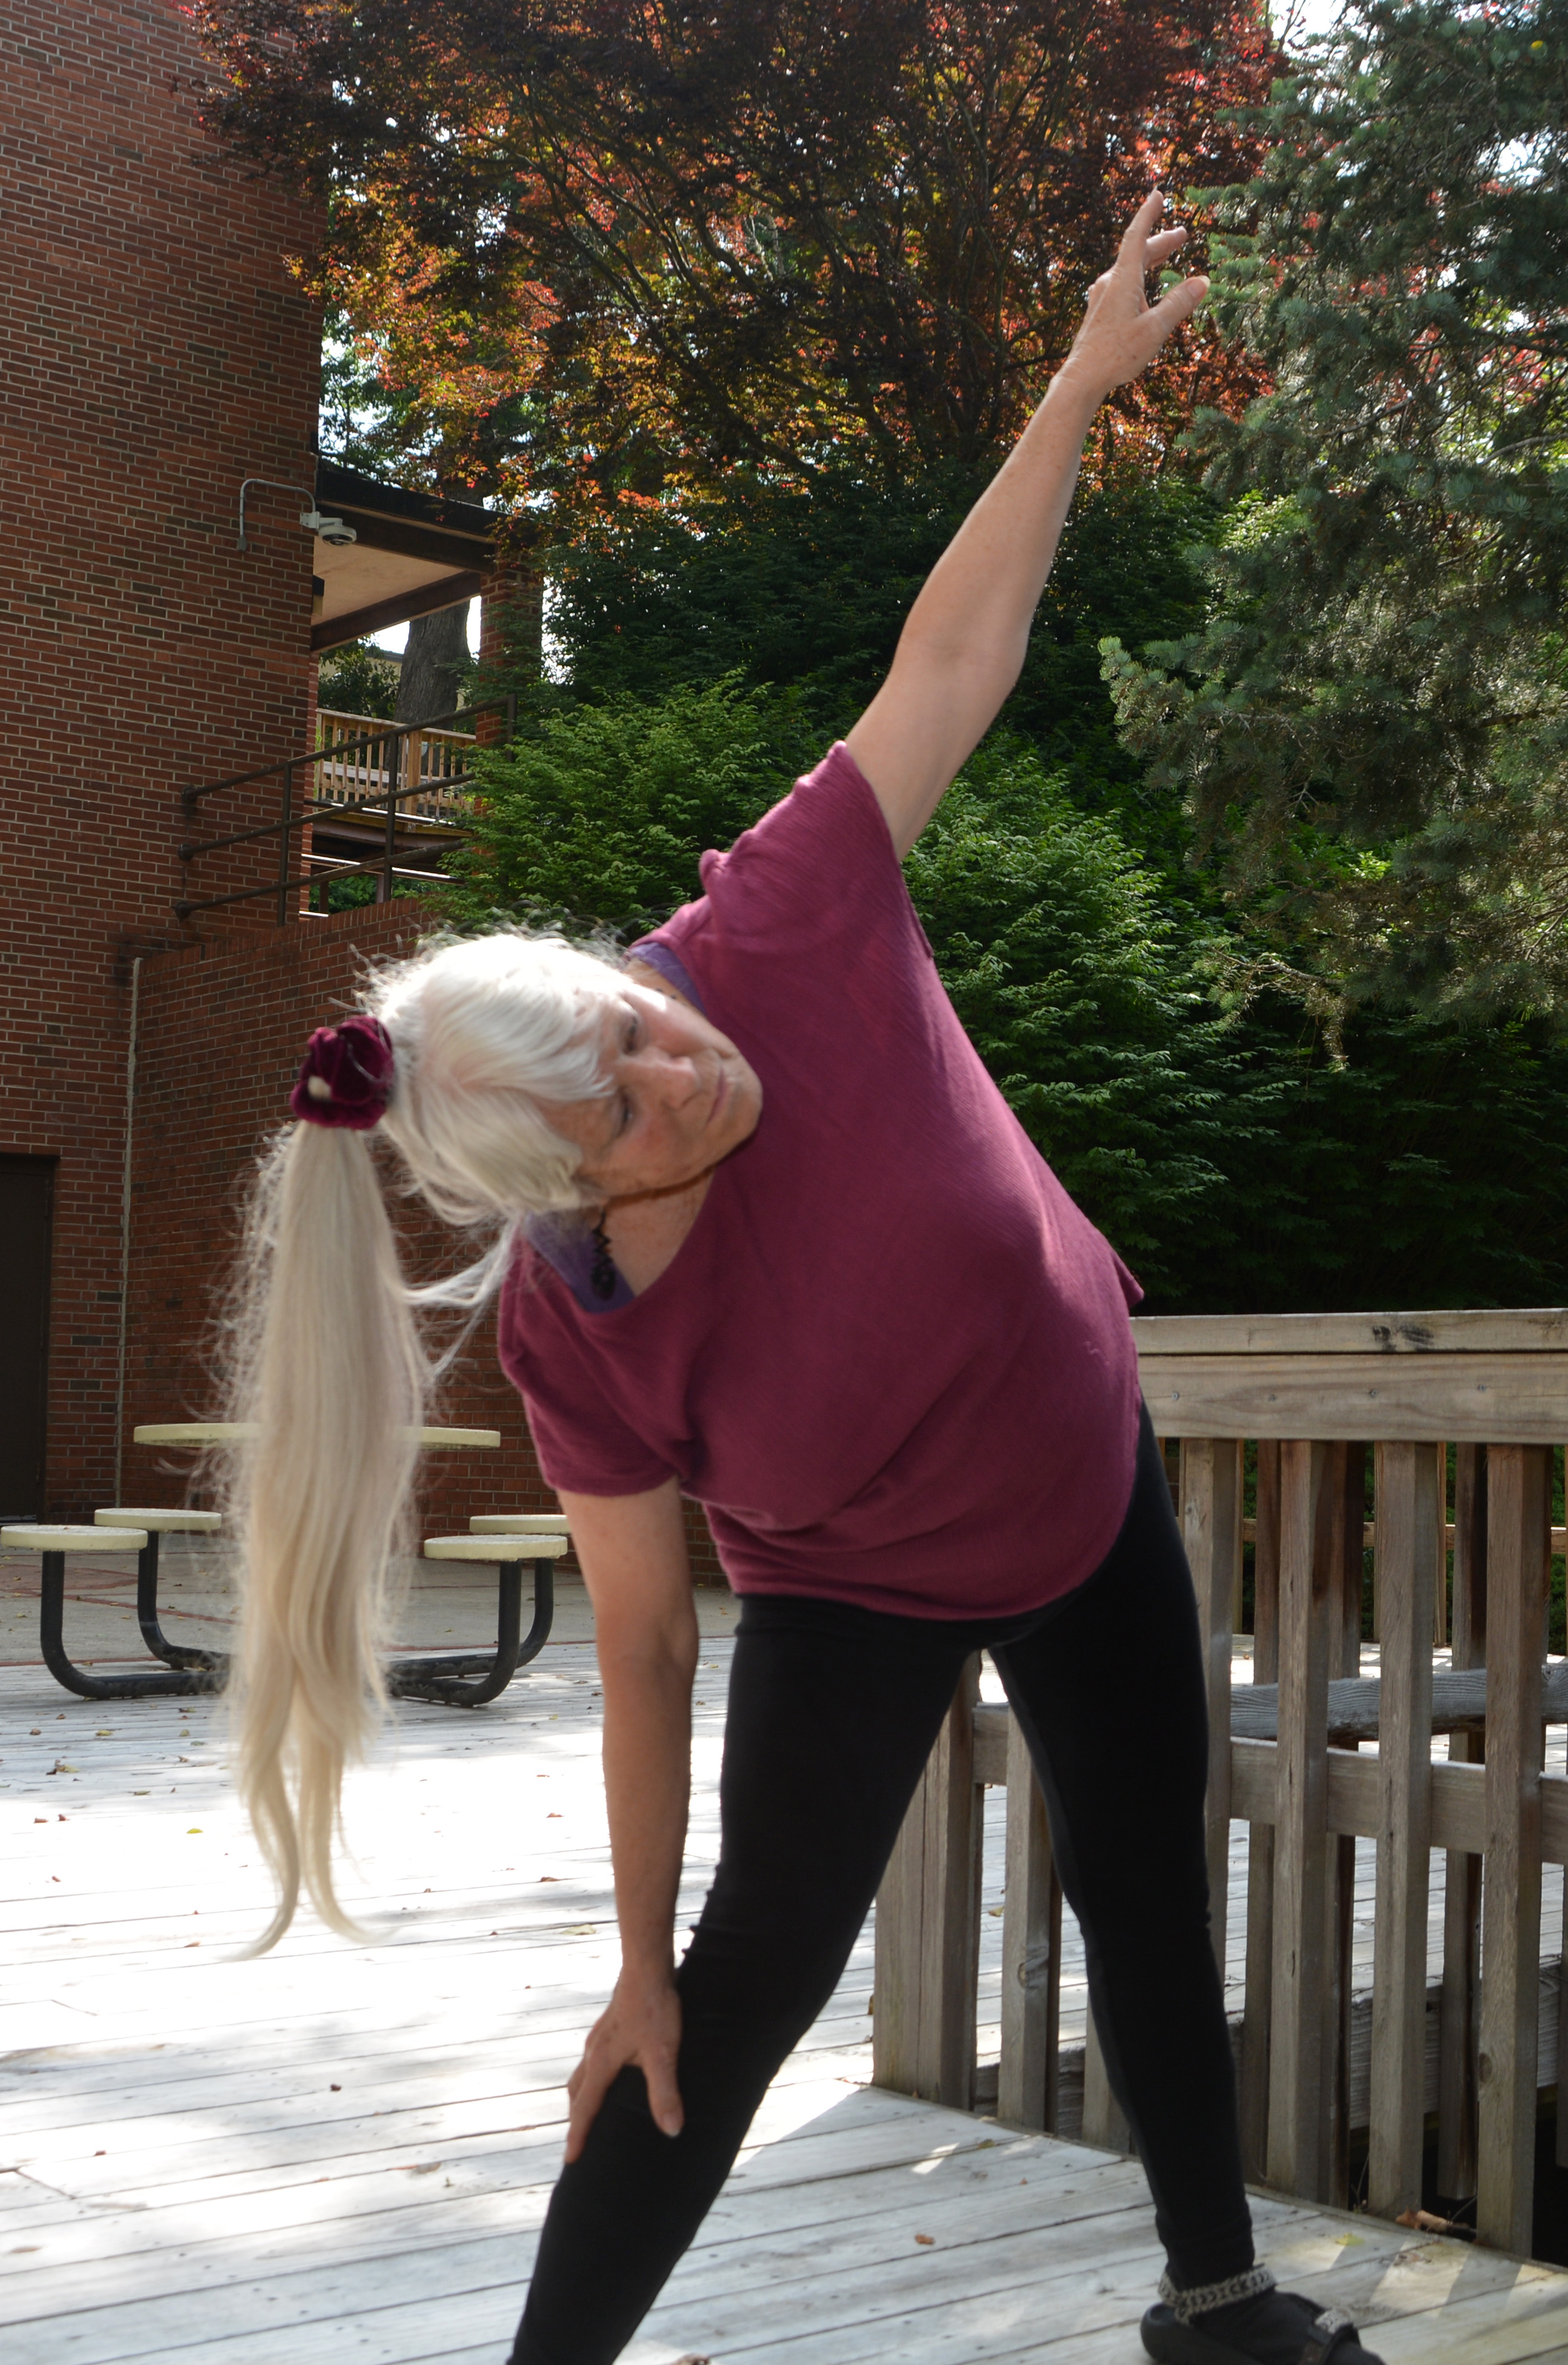 Pamela Norris will be teaching Yoga and Middle Eastern Dance classes in August at Southwestern Community College’s Jackson Campus.